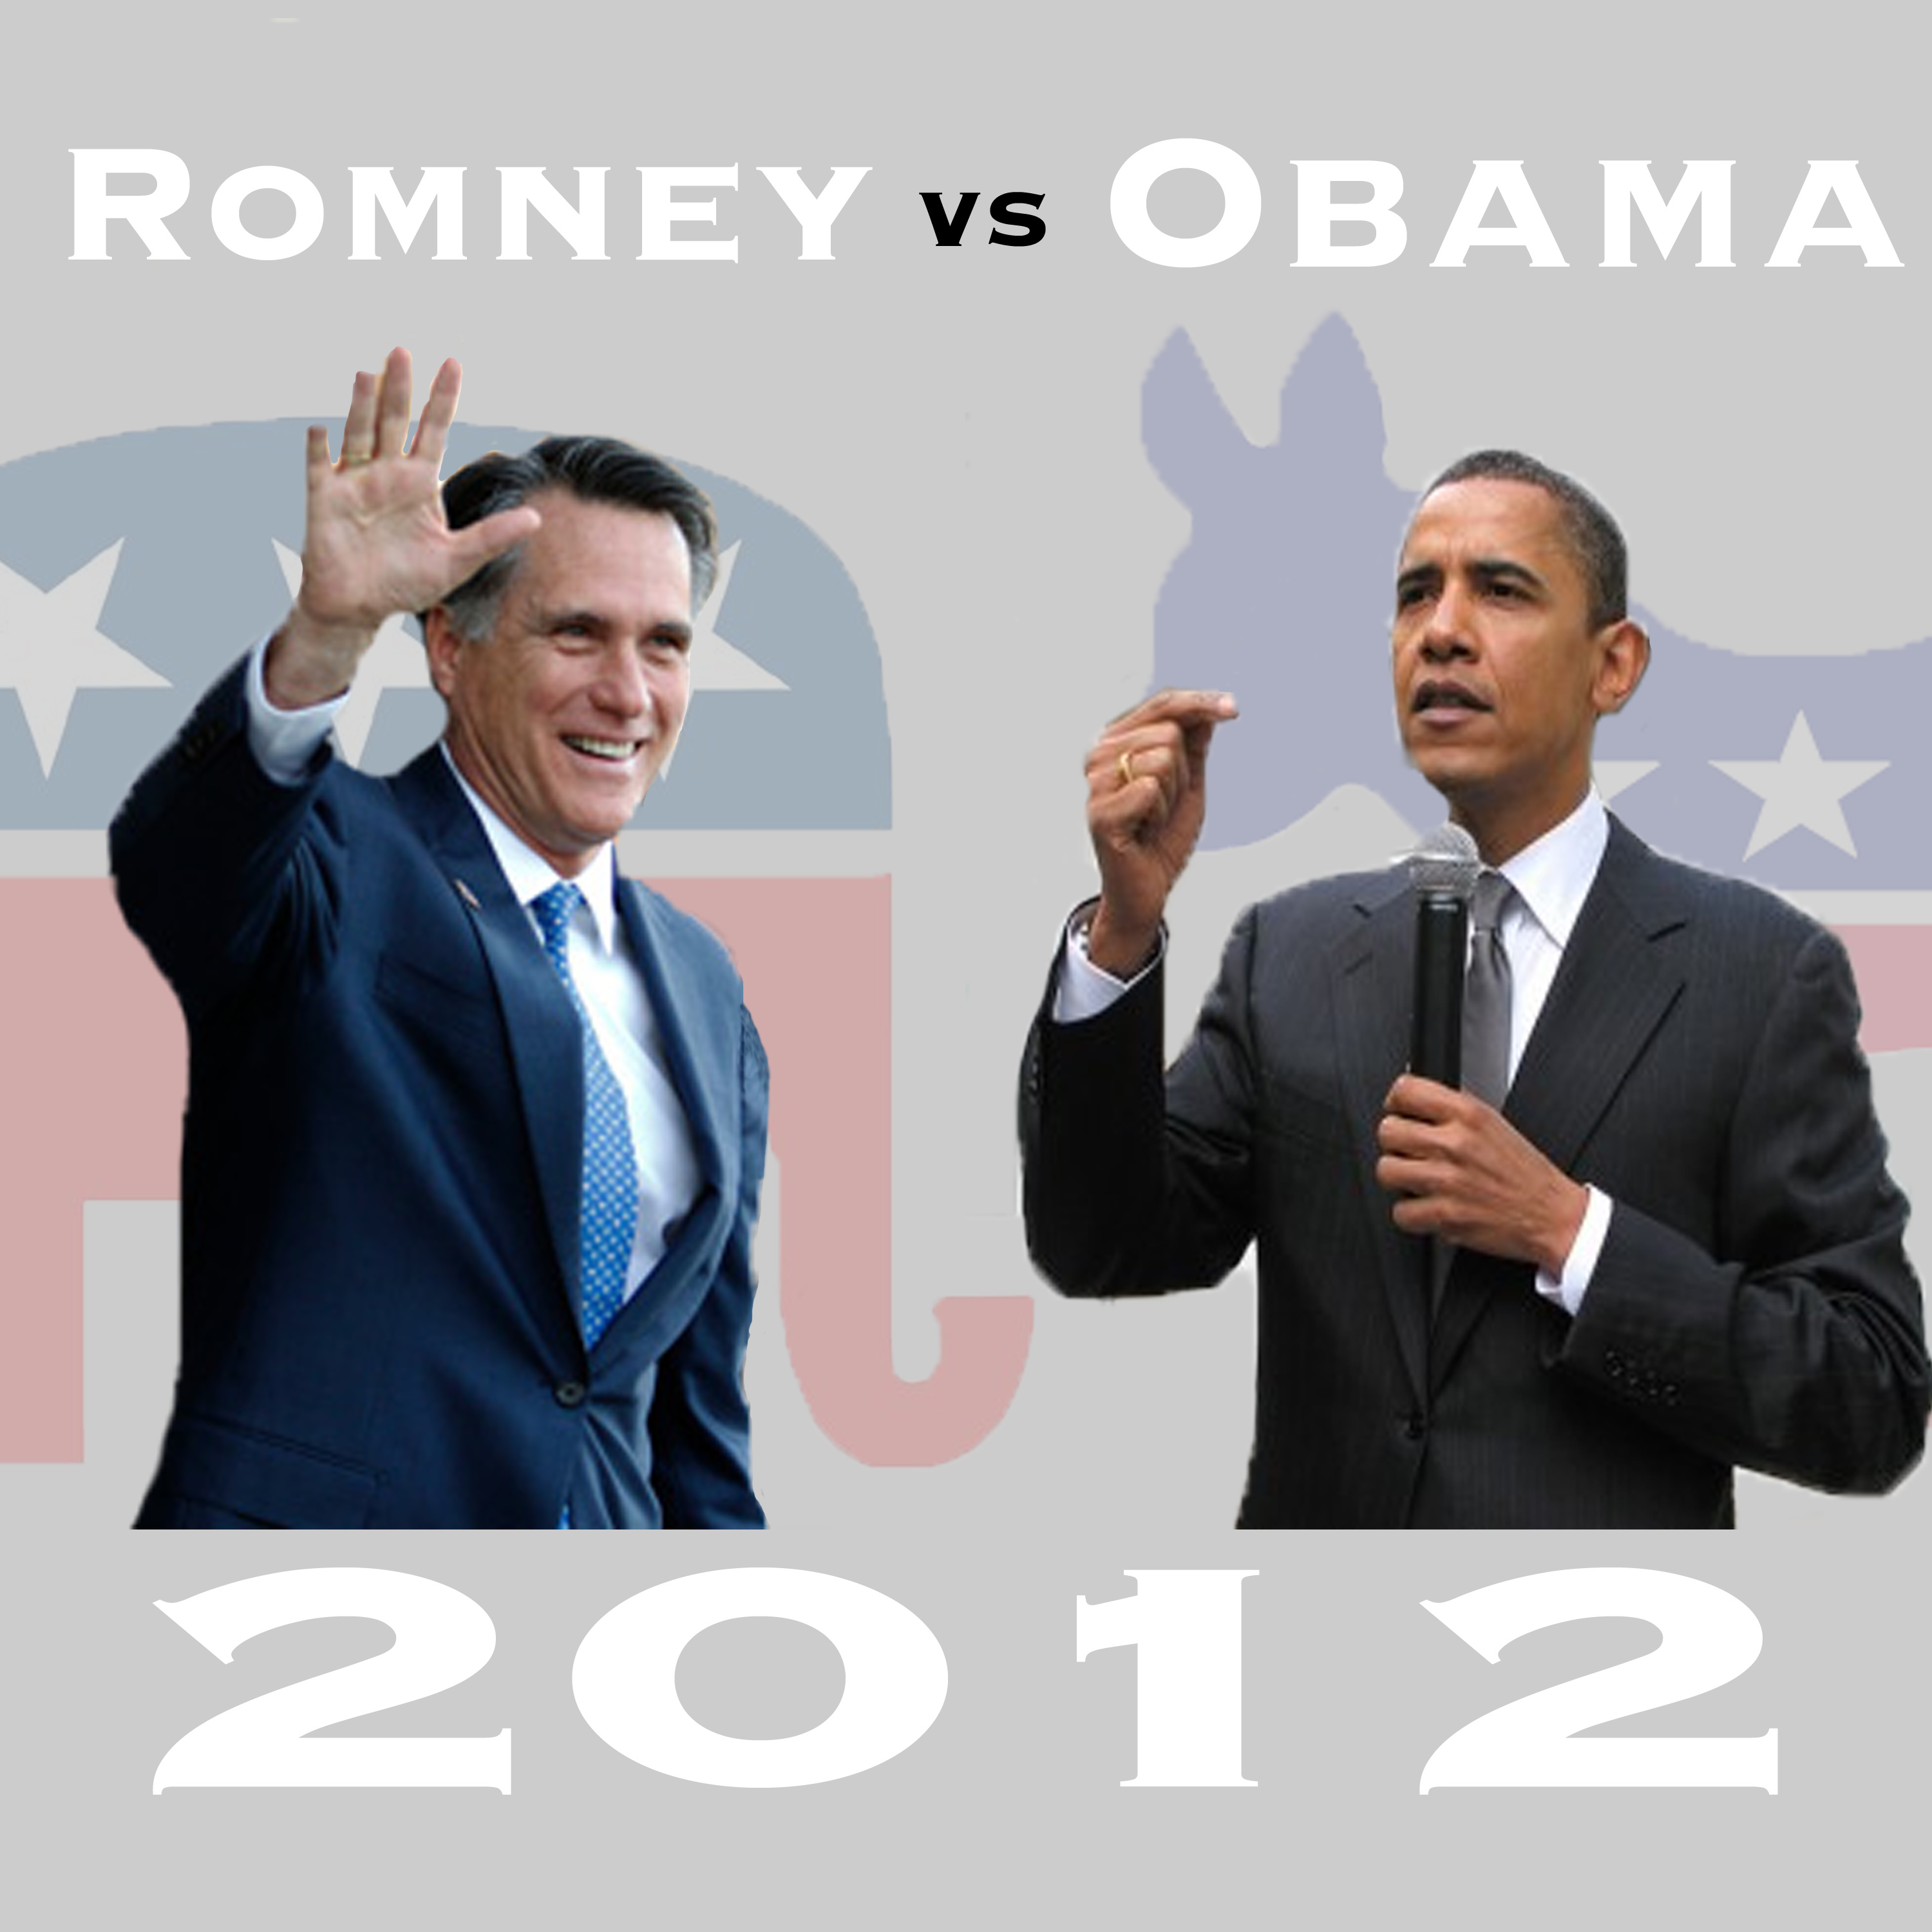 The presidential candidates for the 2012 election are Mitt Romney and Barack Obama. Credit, Obama photo: The Rio Times, Creative Commons. Credit, Romney photo: The Citizens Compass, Creative Commons. Credit, graphic: Jackson Tovar/The Foothill Dragon Press